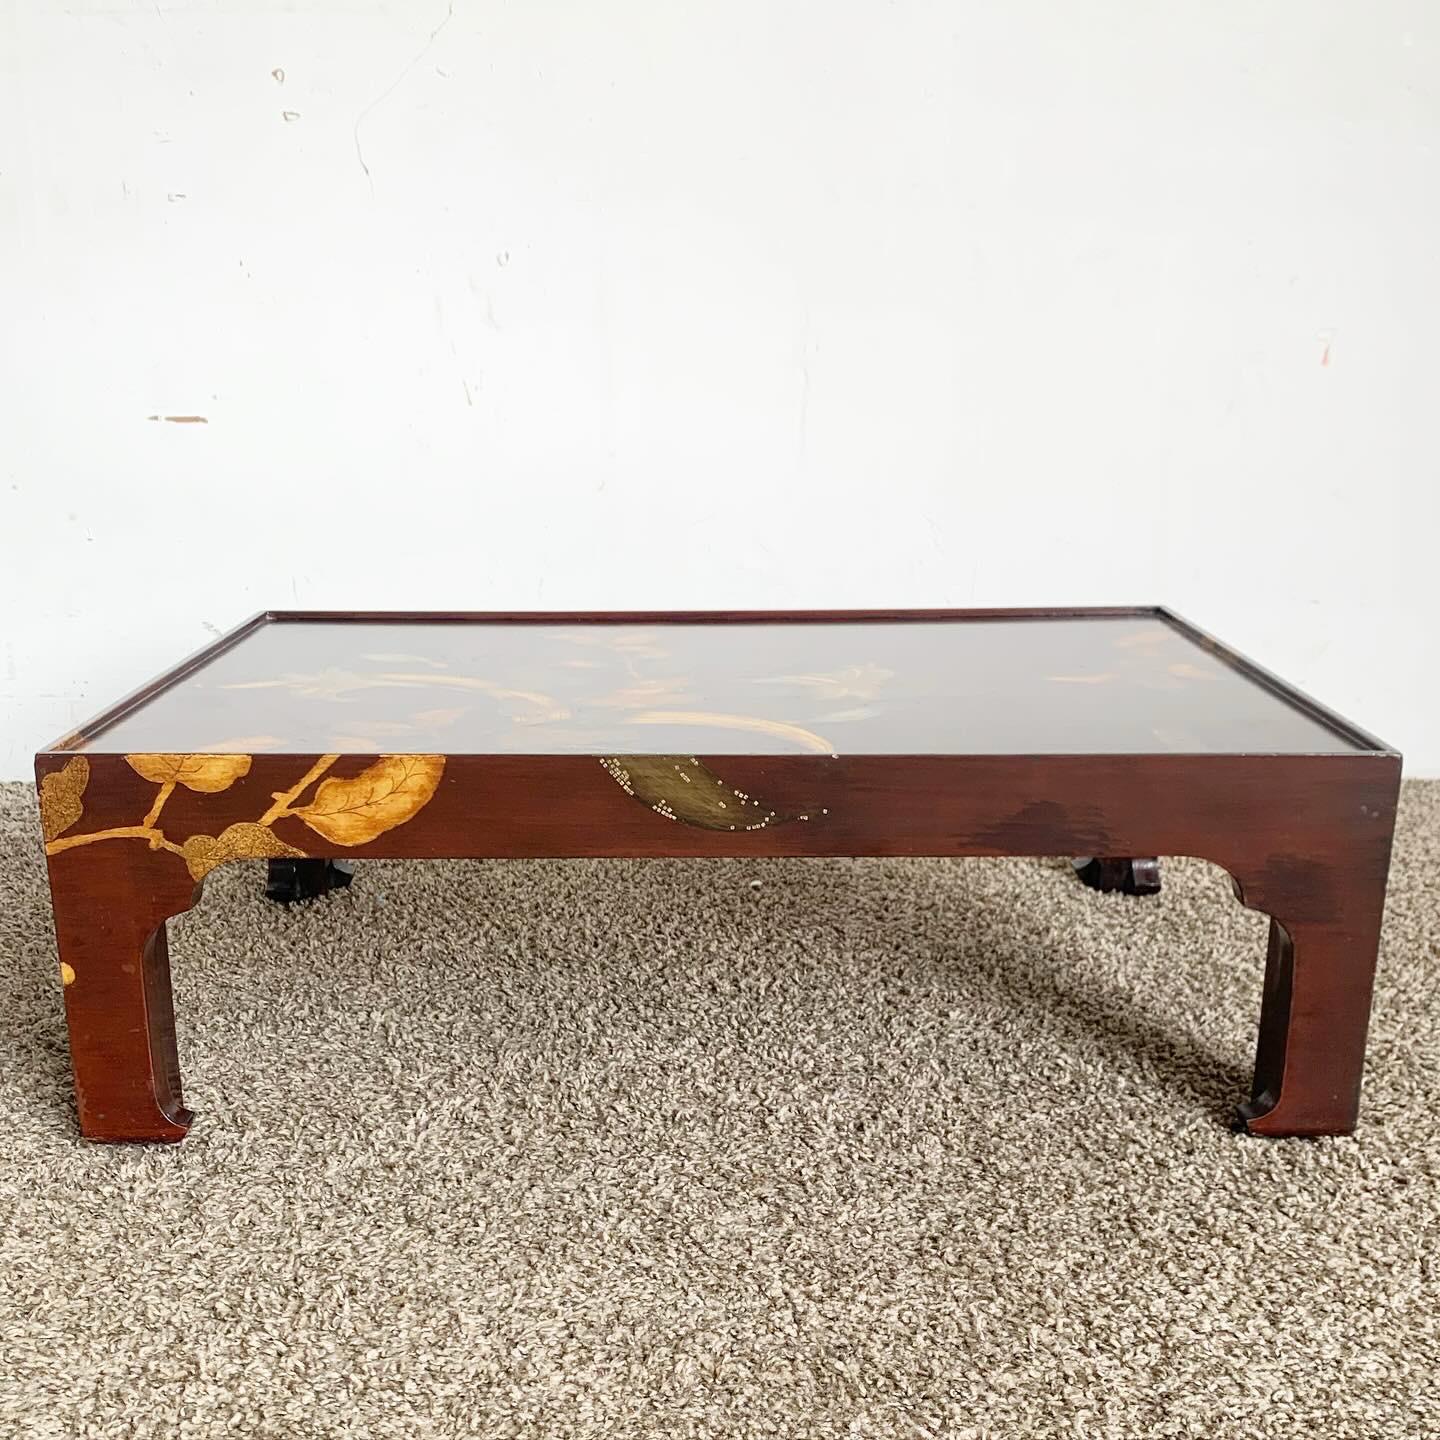 Vintage Asian Wooden Inlayed Asian Prayer Table For Sale 2